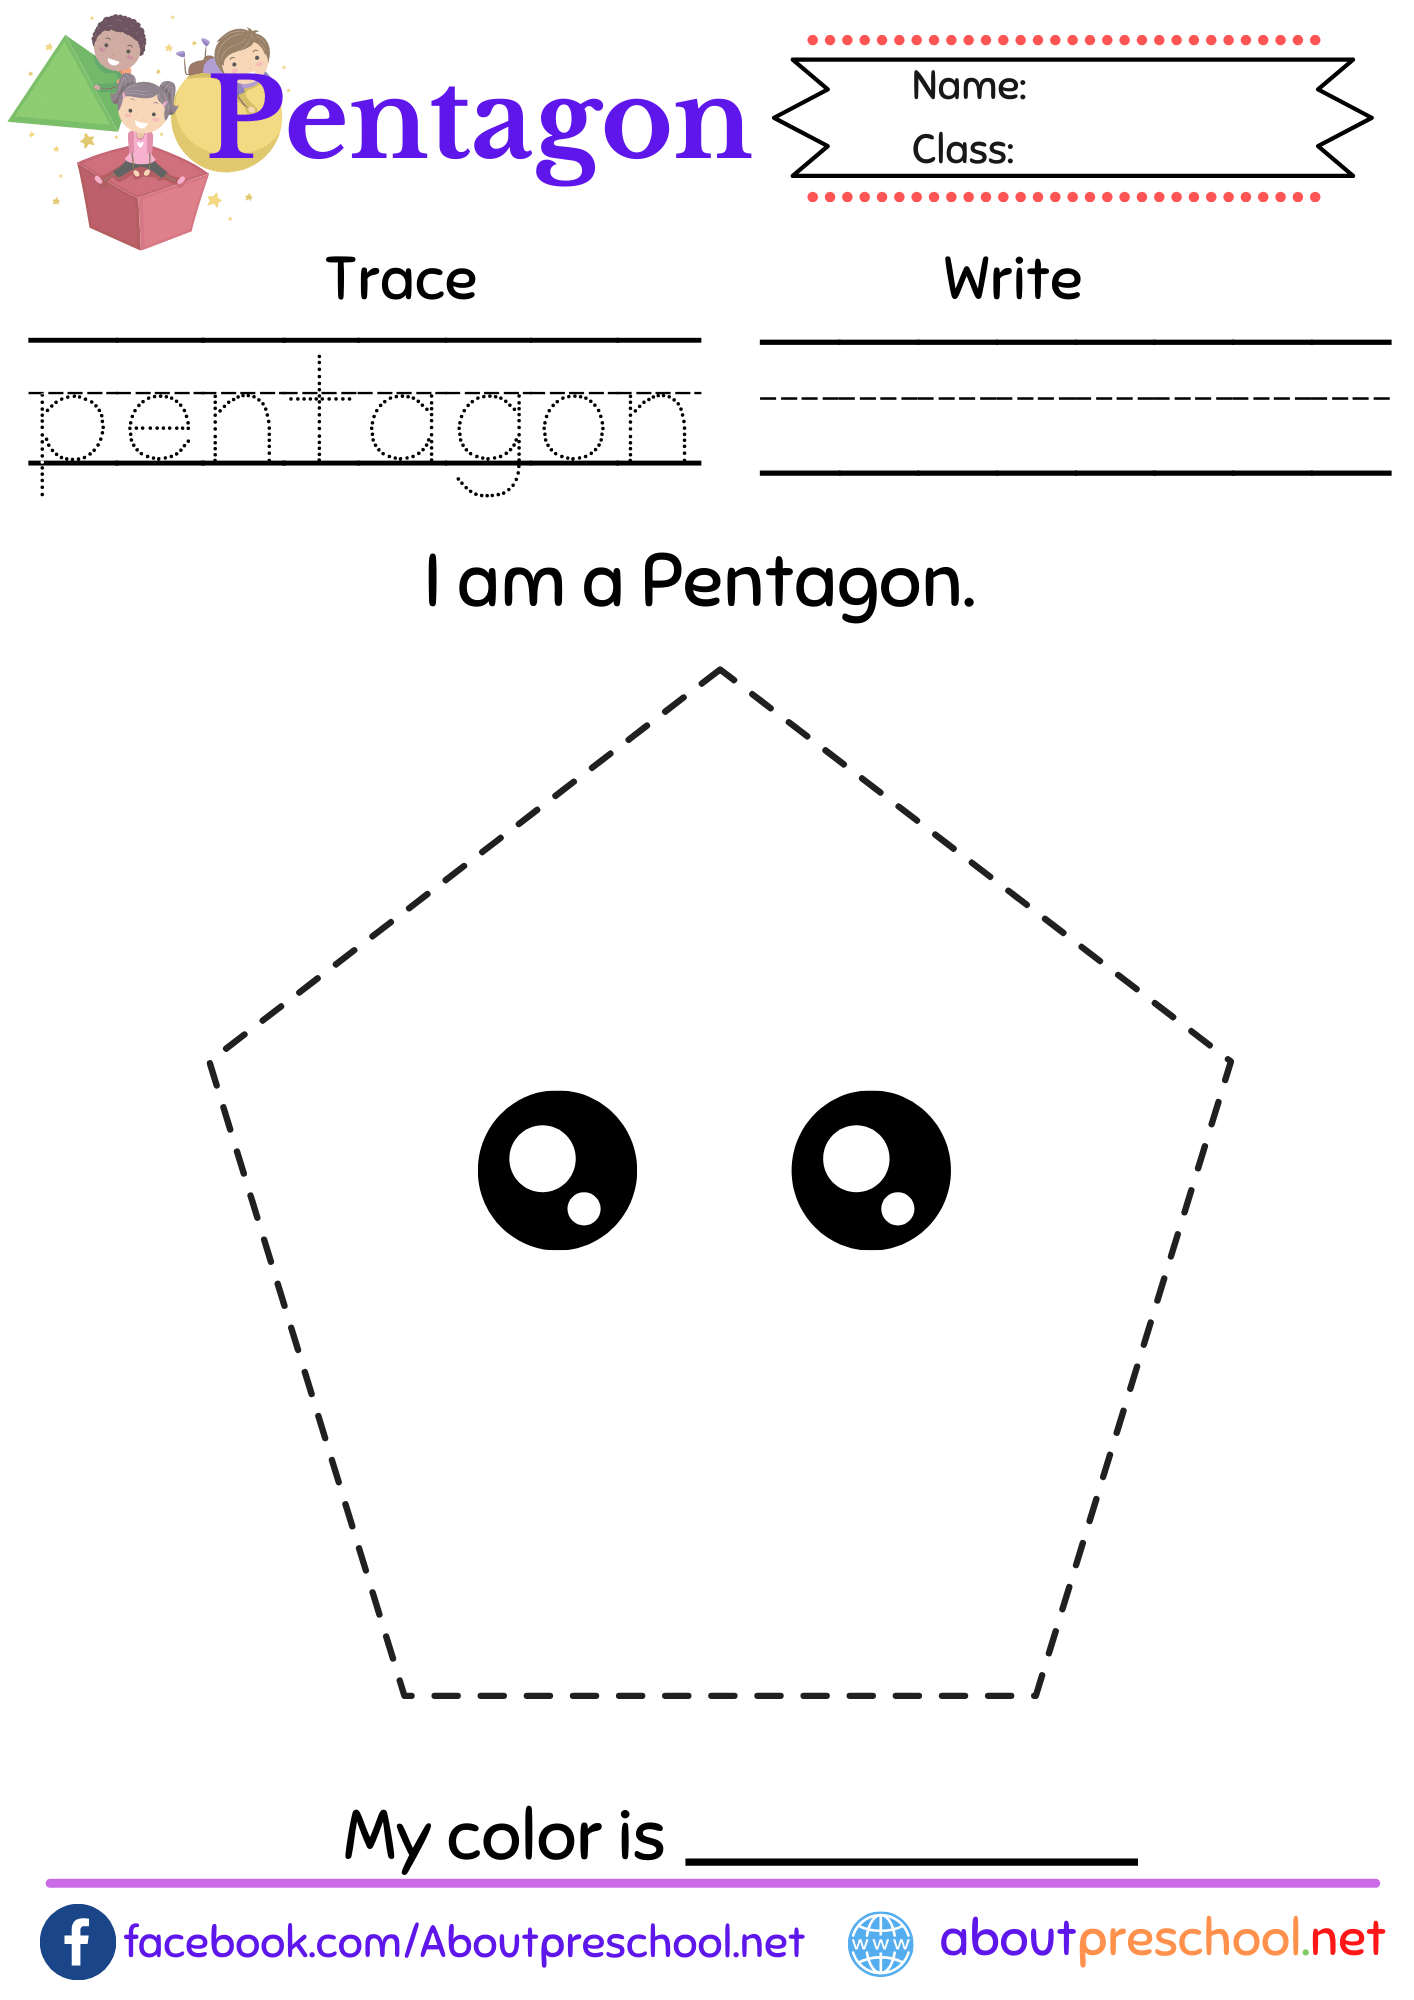 Free Trace and Color the pentagon worksheet